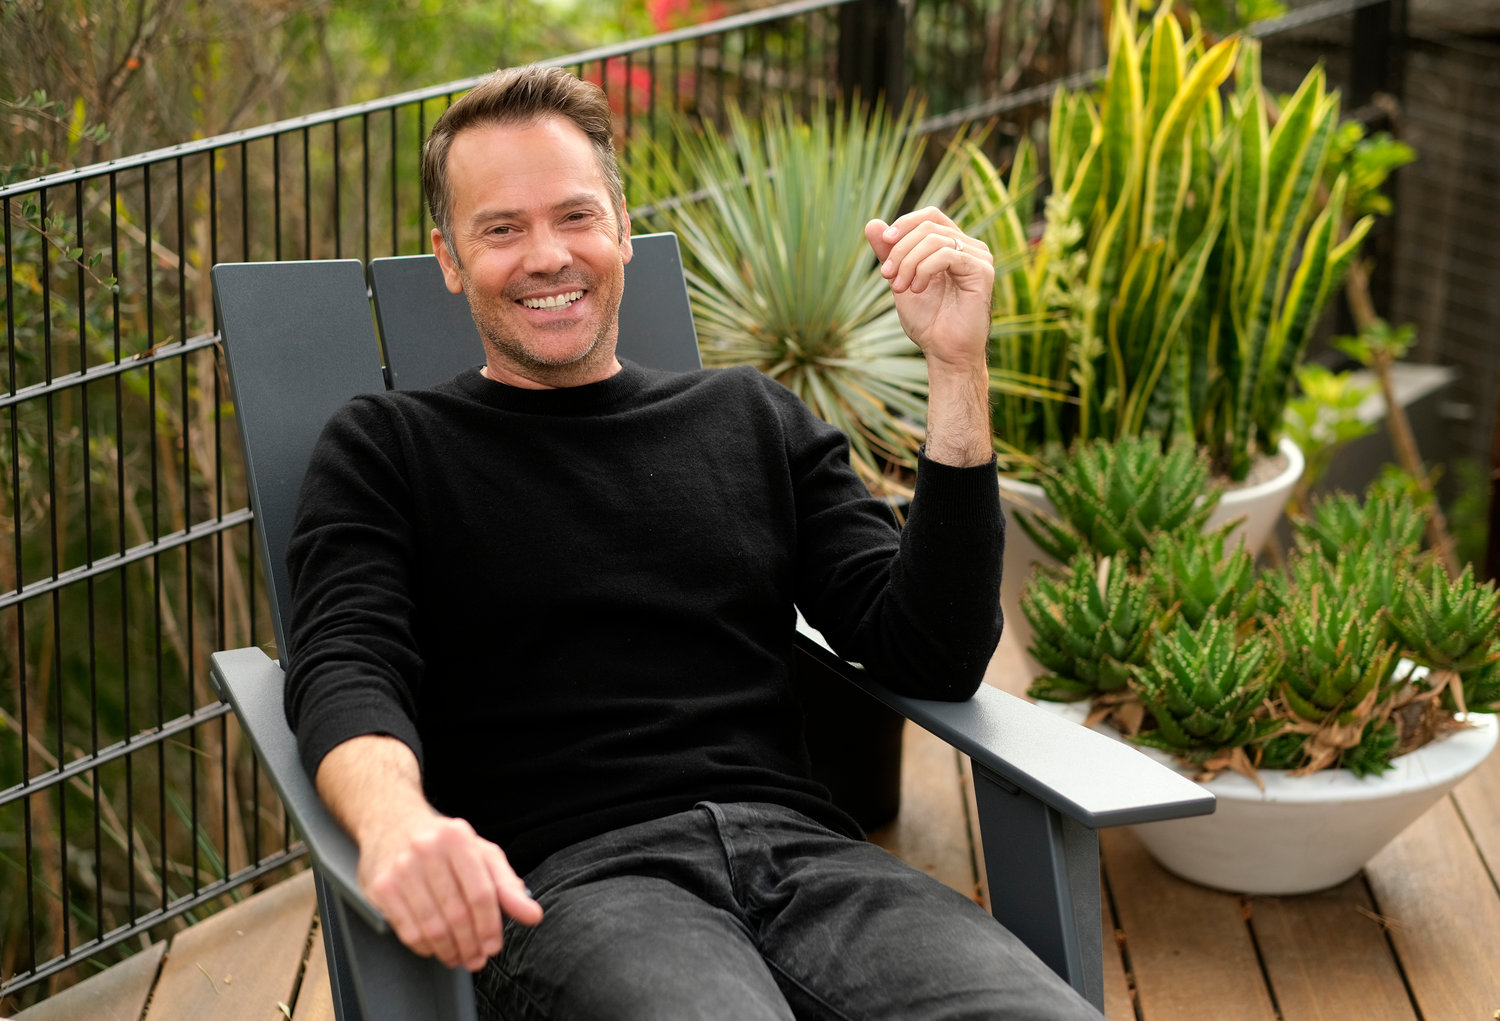 PORTRAIT POSE — Actor Barry Watson poses for a portrait at his home in the Brentwood section of Los Angeles on Oct. 22, to promote a reboot of the Michael Landon TV series, “Highway to Heaven,” which co-stars Jill Scott as an angel sent to earth to help people.